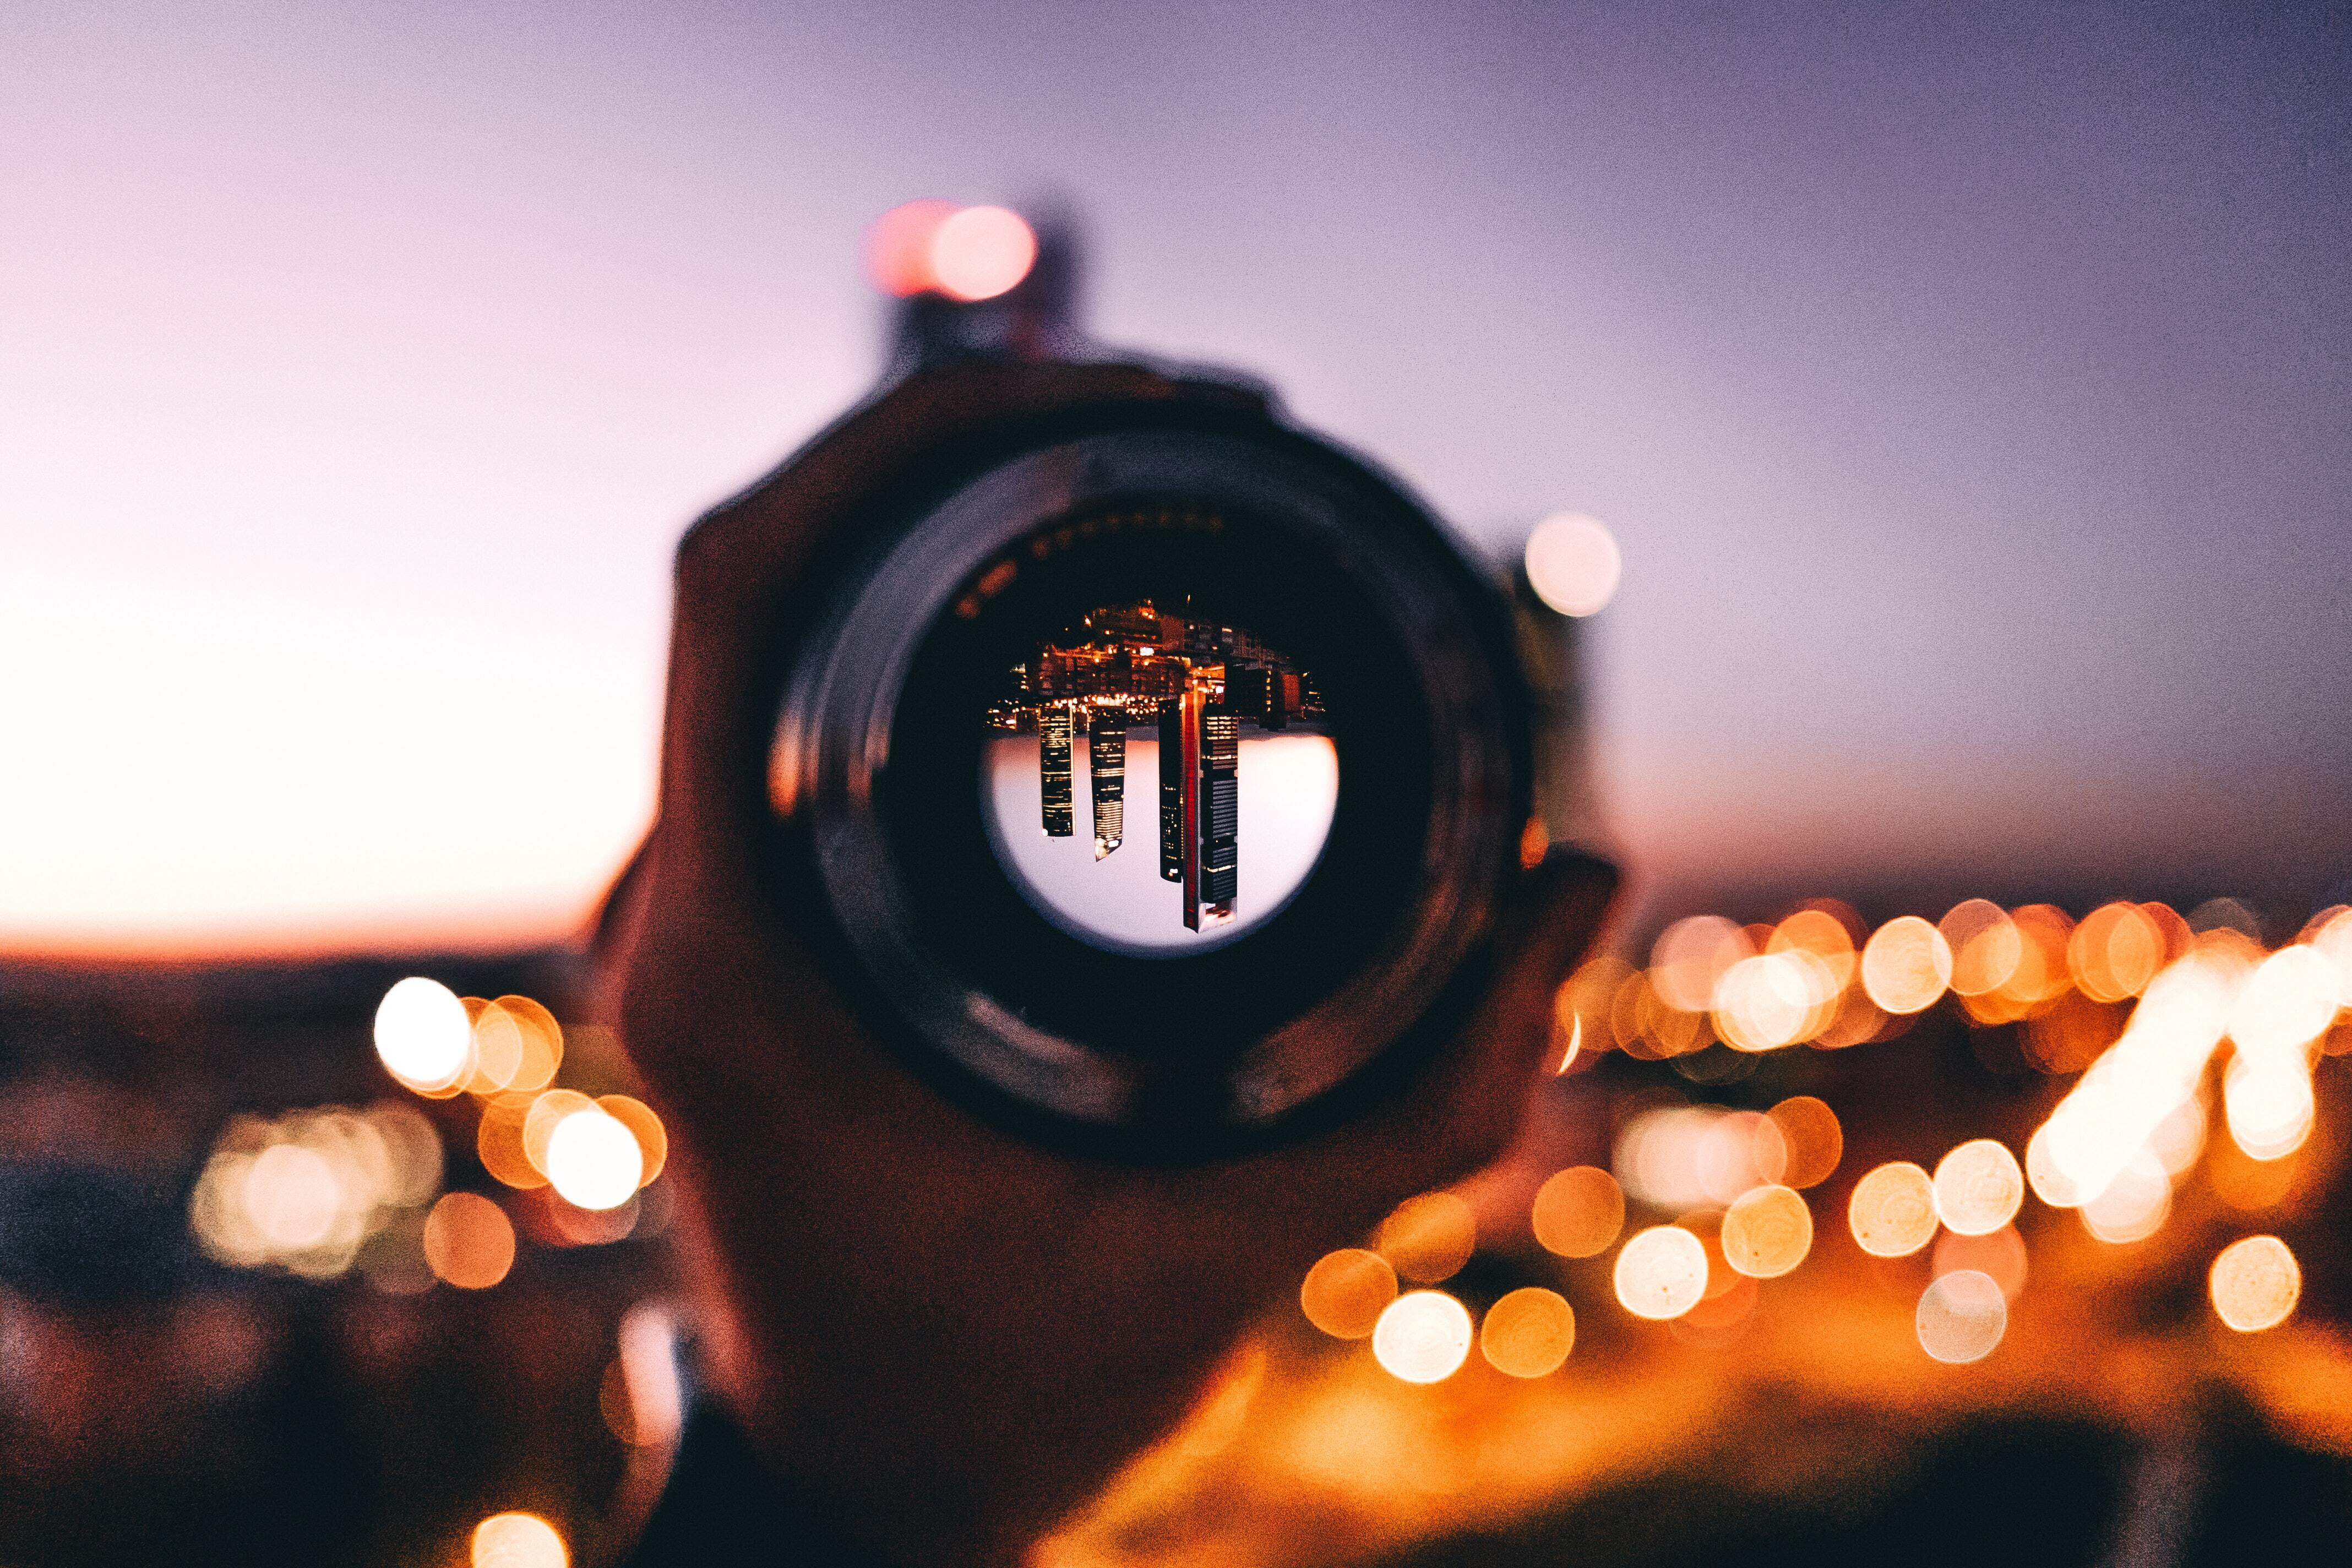 Photo of a camera lens showing an upside down city scape at night time.